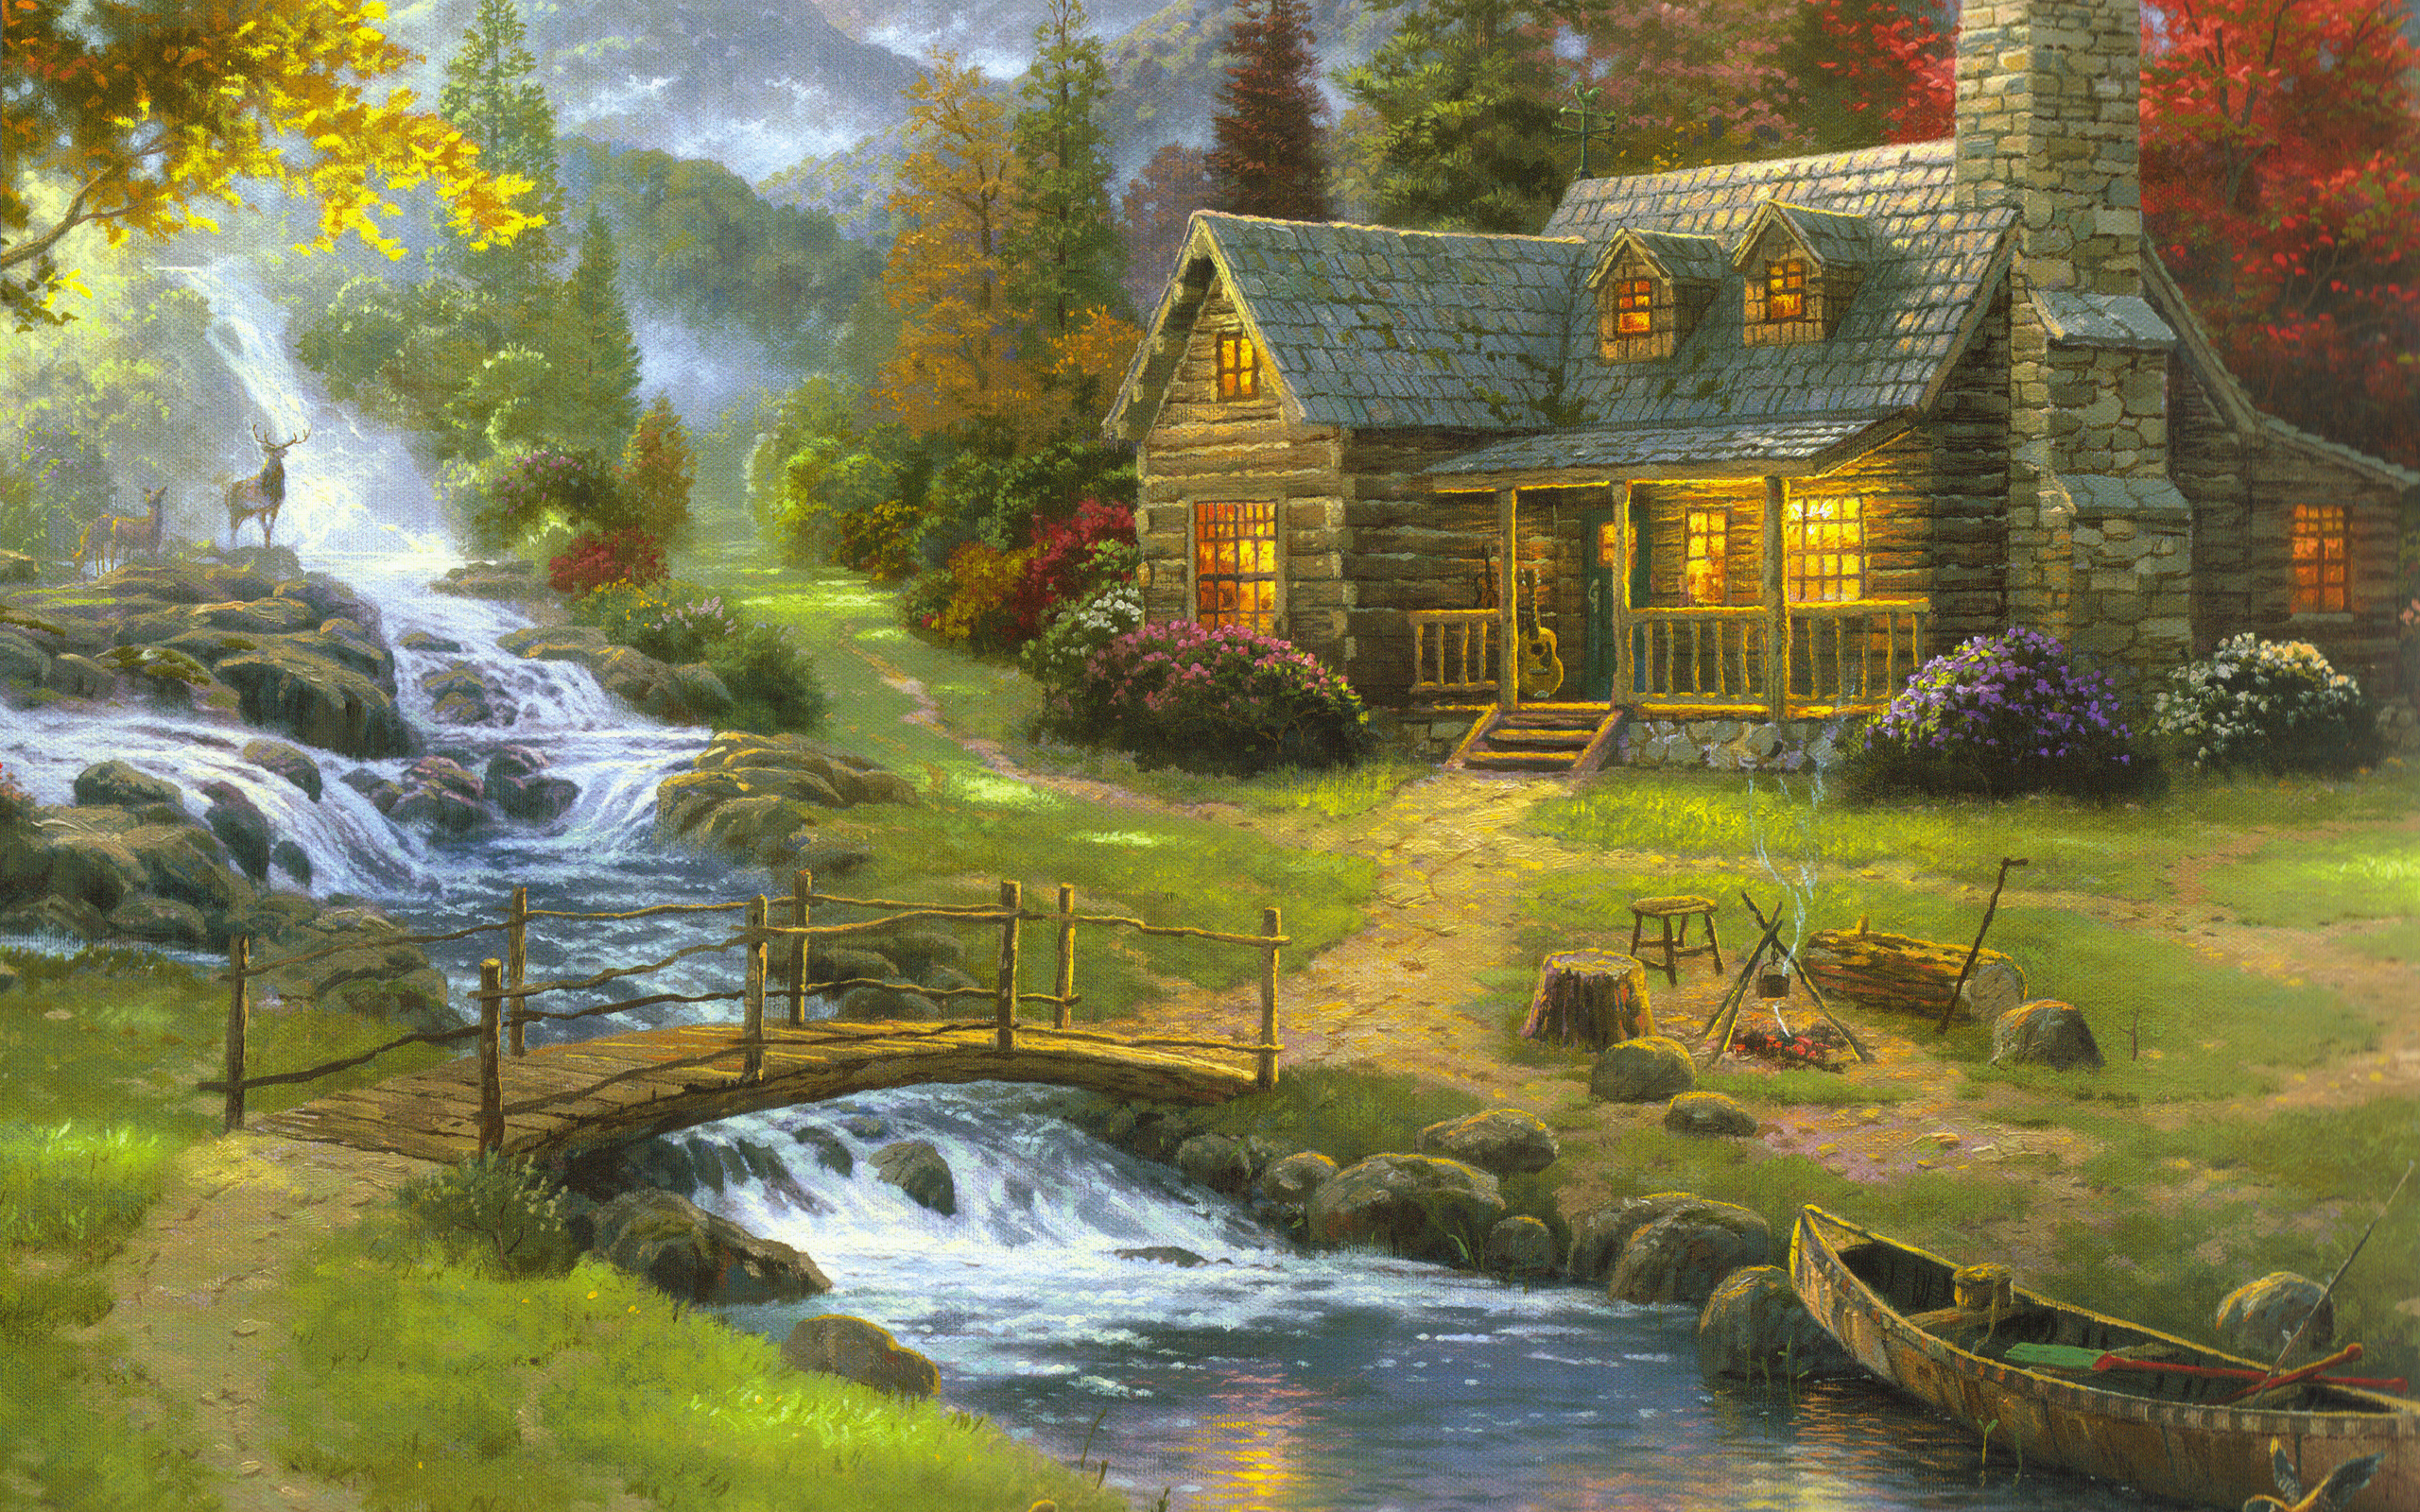 Hd Images Of Nature Paintings - HD Wallpaper 